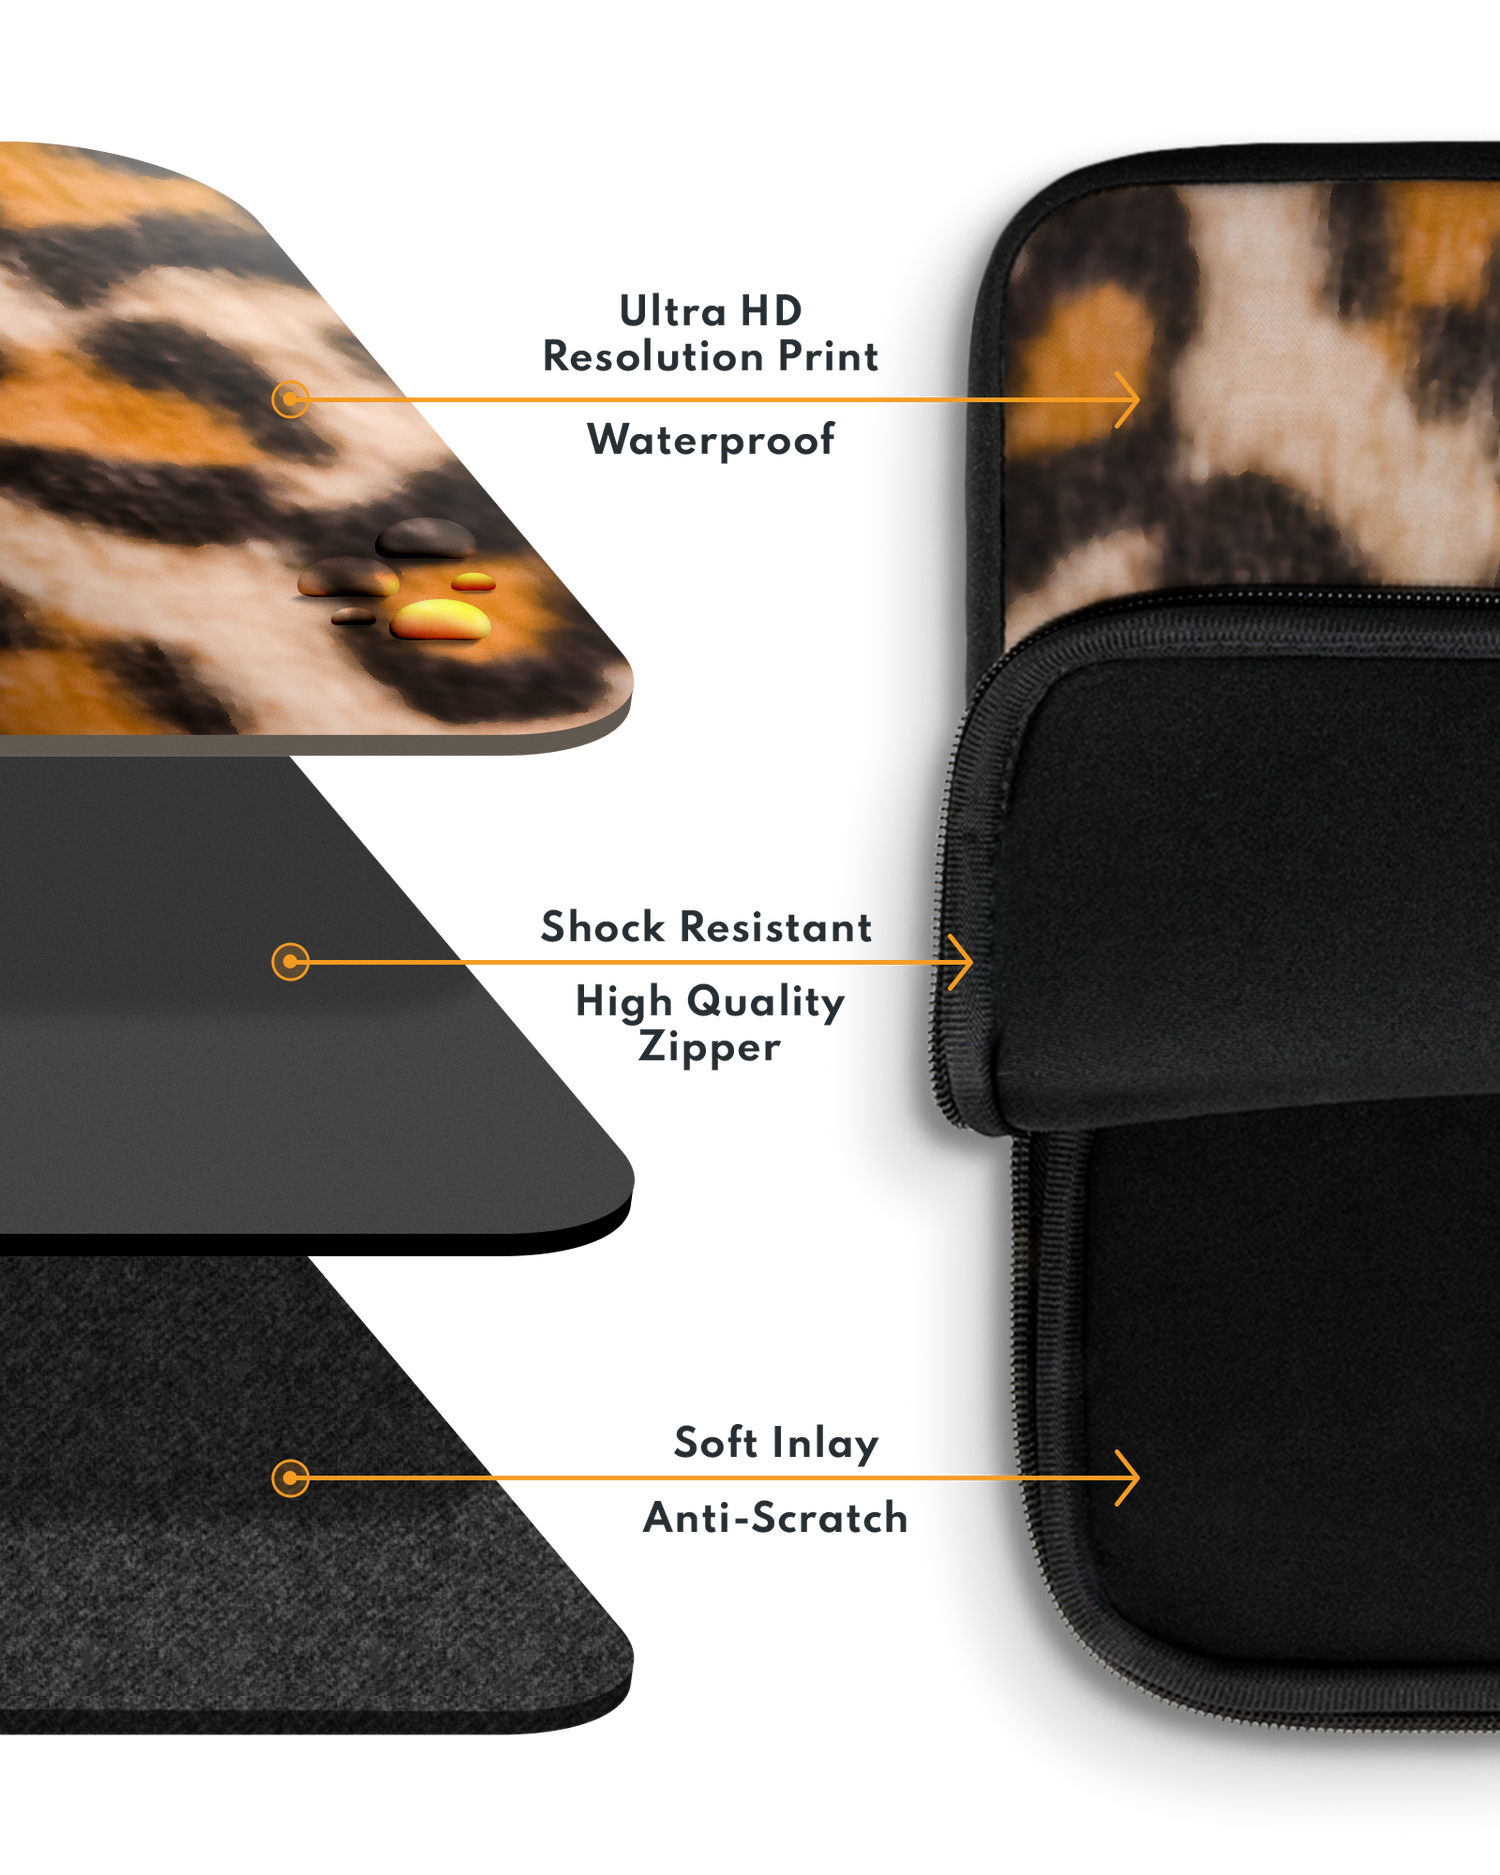 Leopard Pattern Laptop Case 14-15 inch with soft inner lining